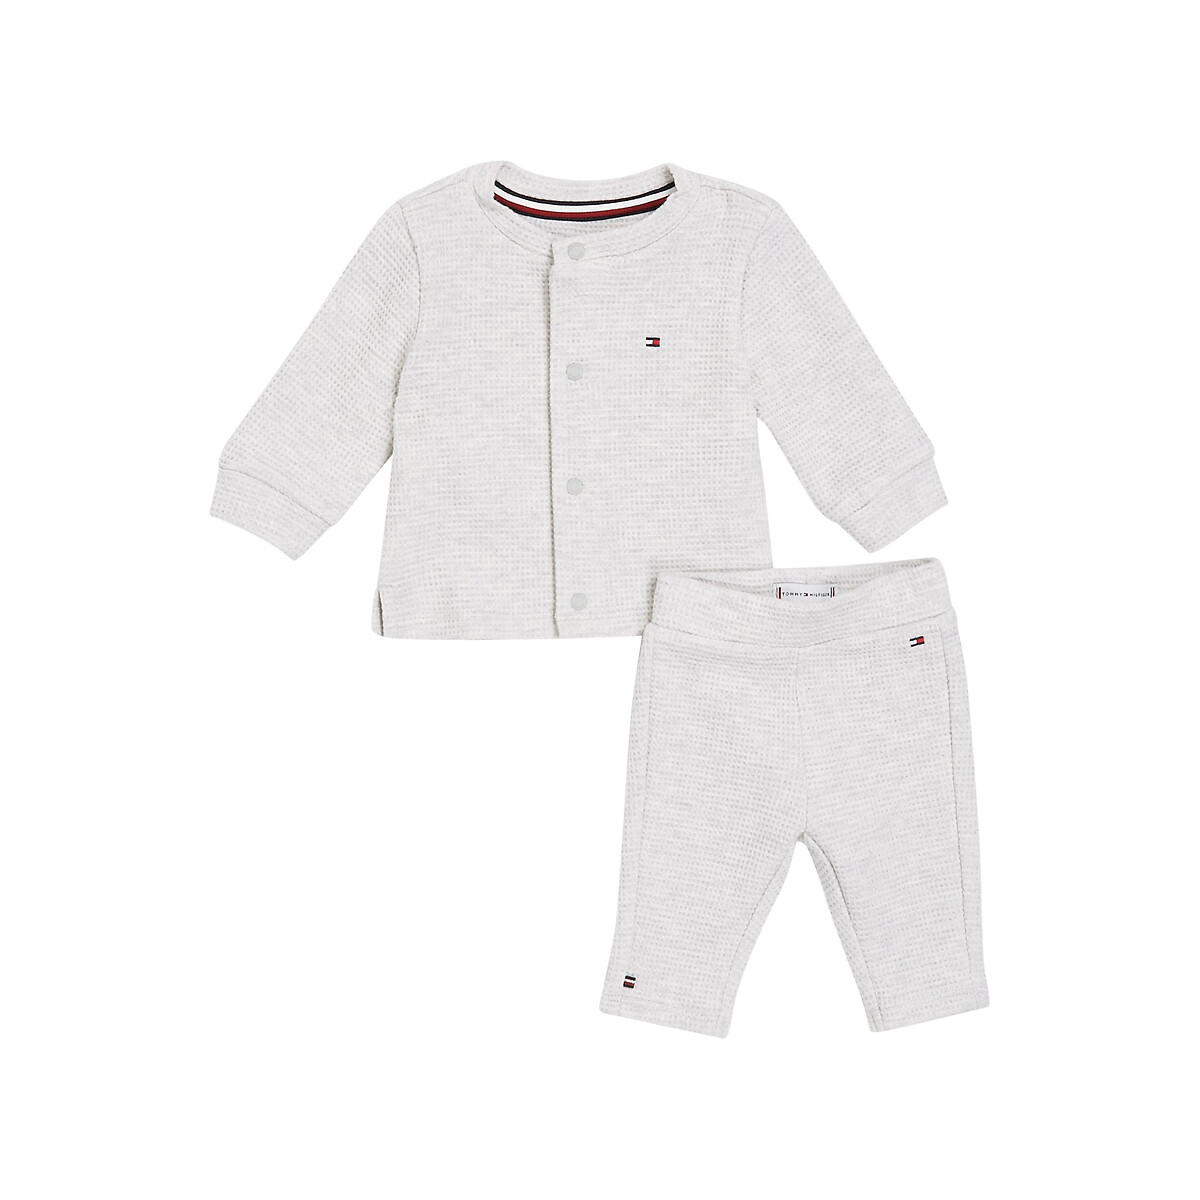 Baby’s 2-Piece Outfit in Cotton